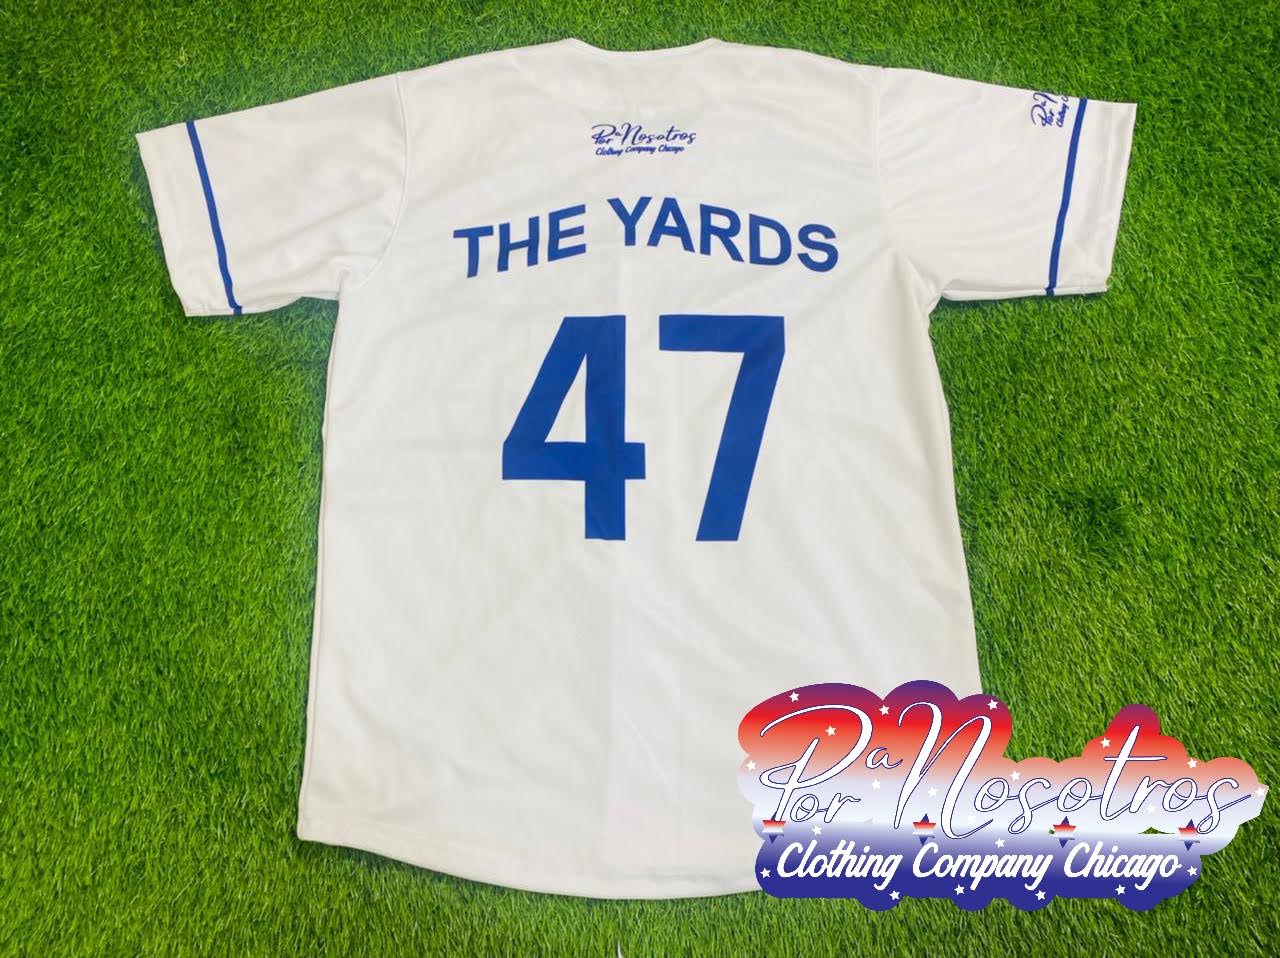 Original Back of the Yards Chicago,IL Black/wht Jersey, Blue/Wht